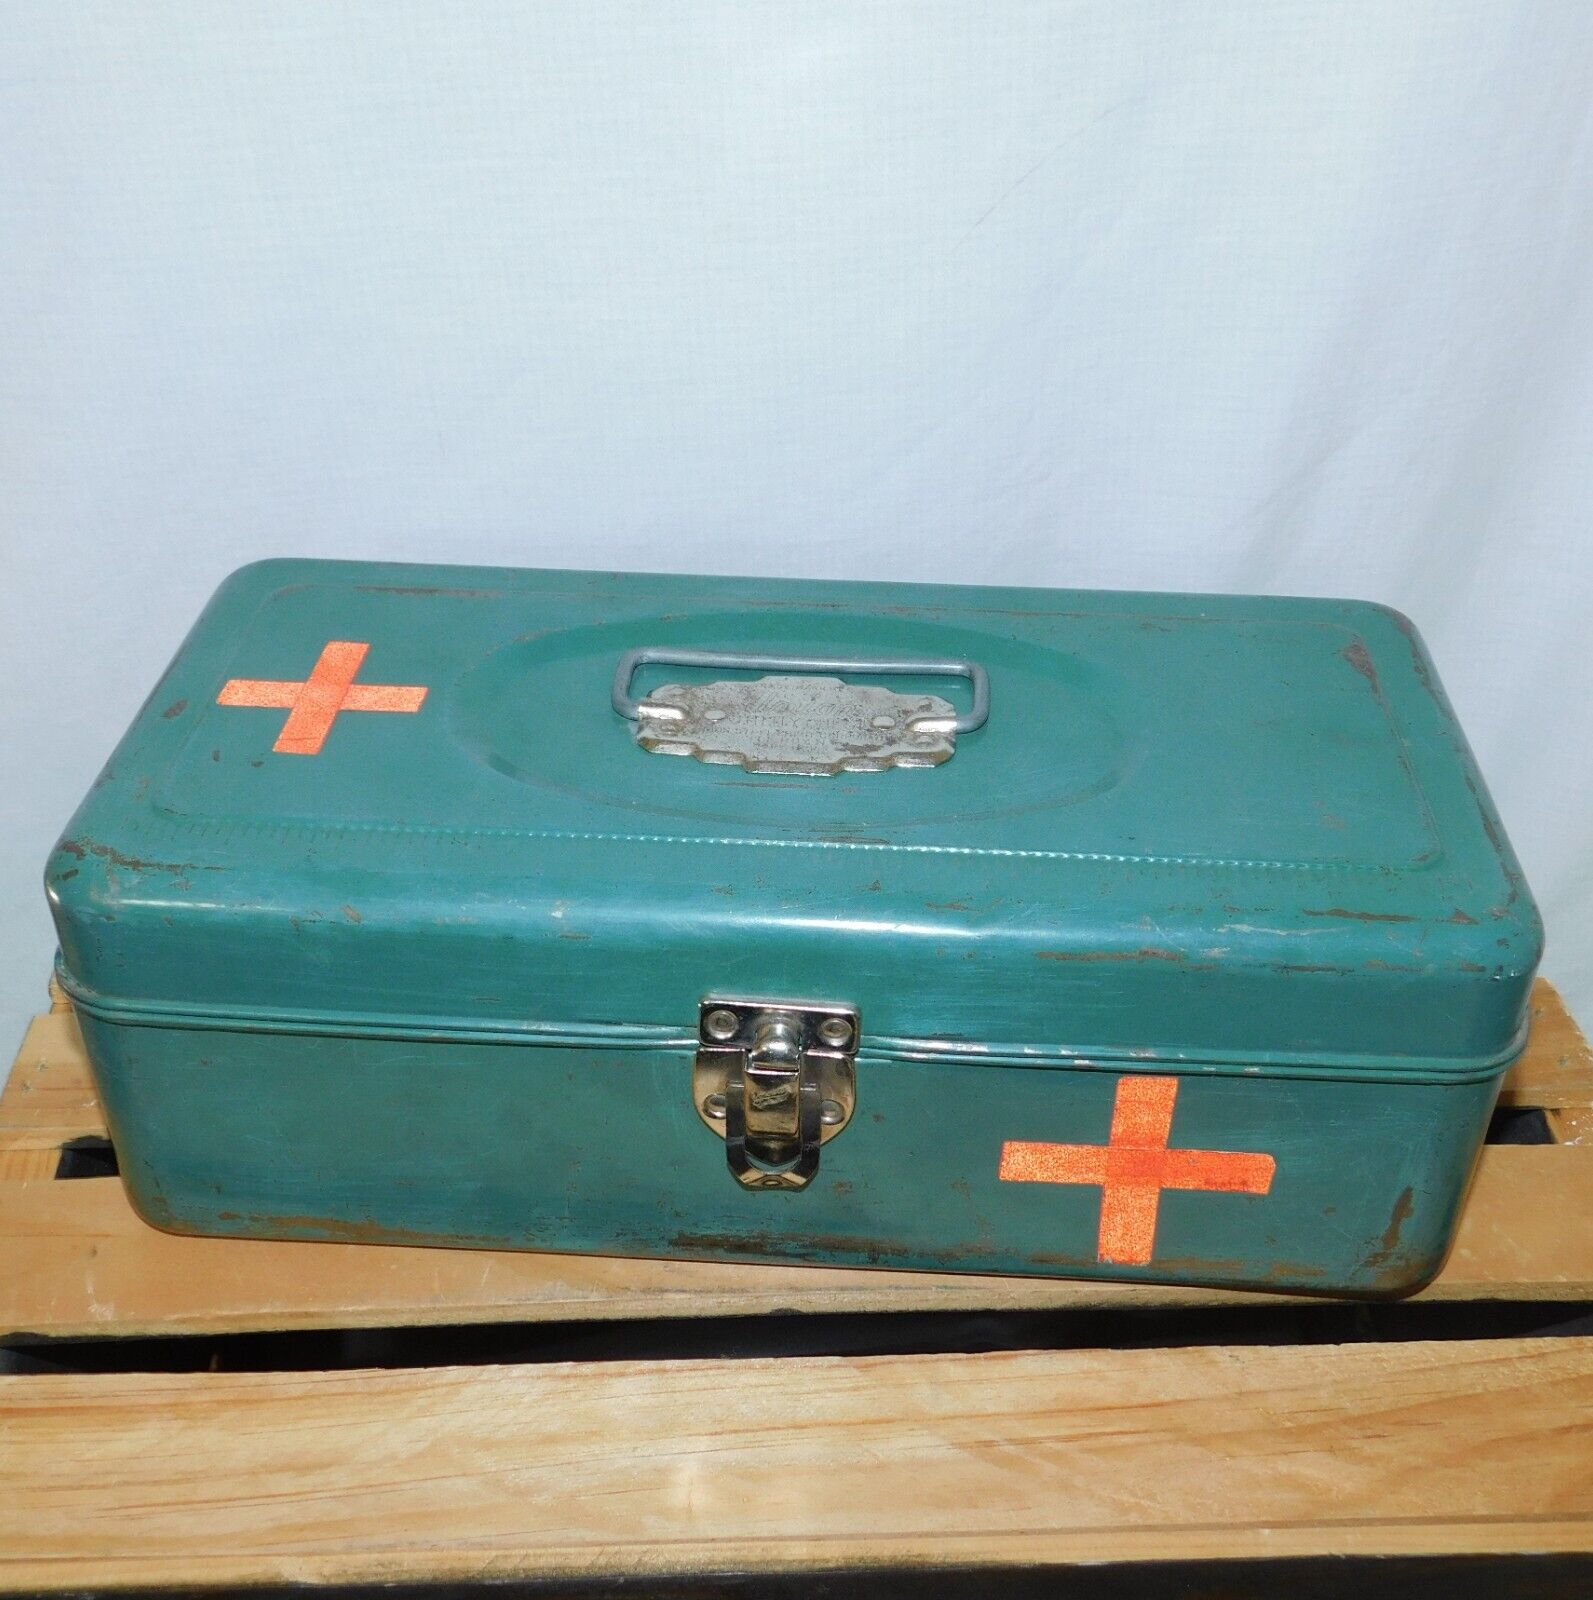 Vtg 1950s Union Utility Chest Steel Tackle Box Tool Box Carrier LeRoy New York